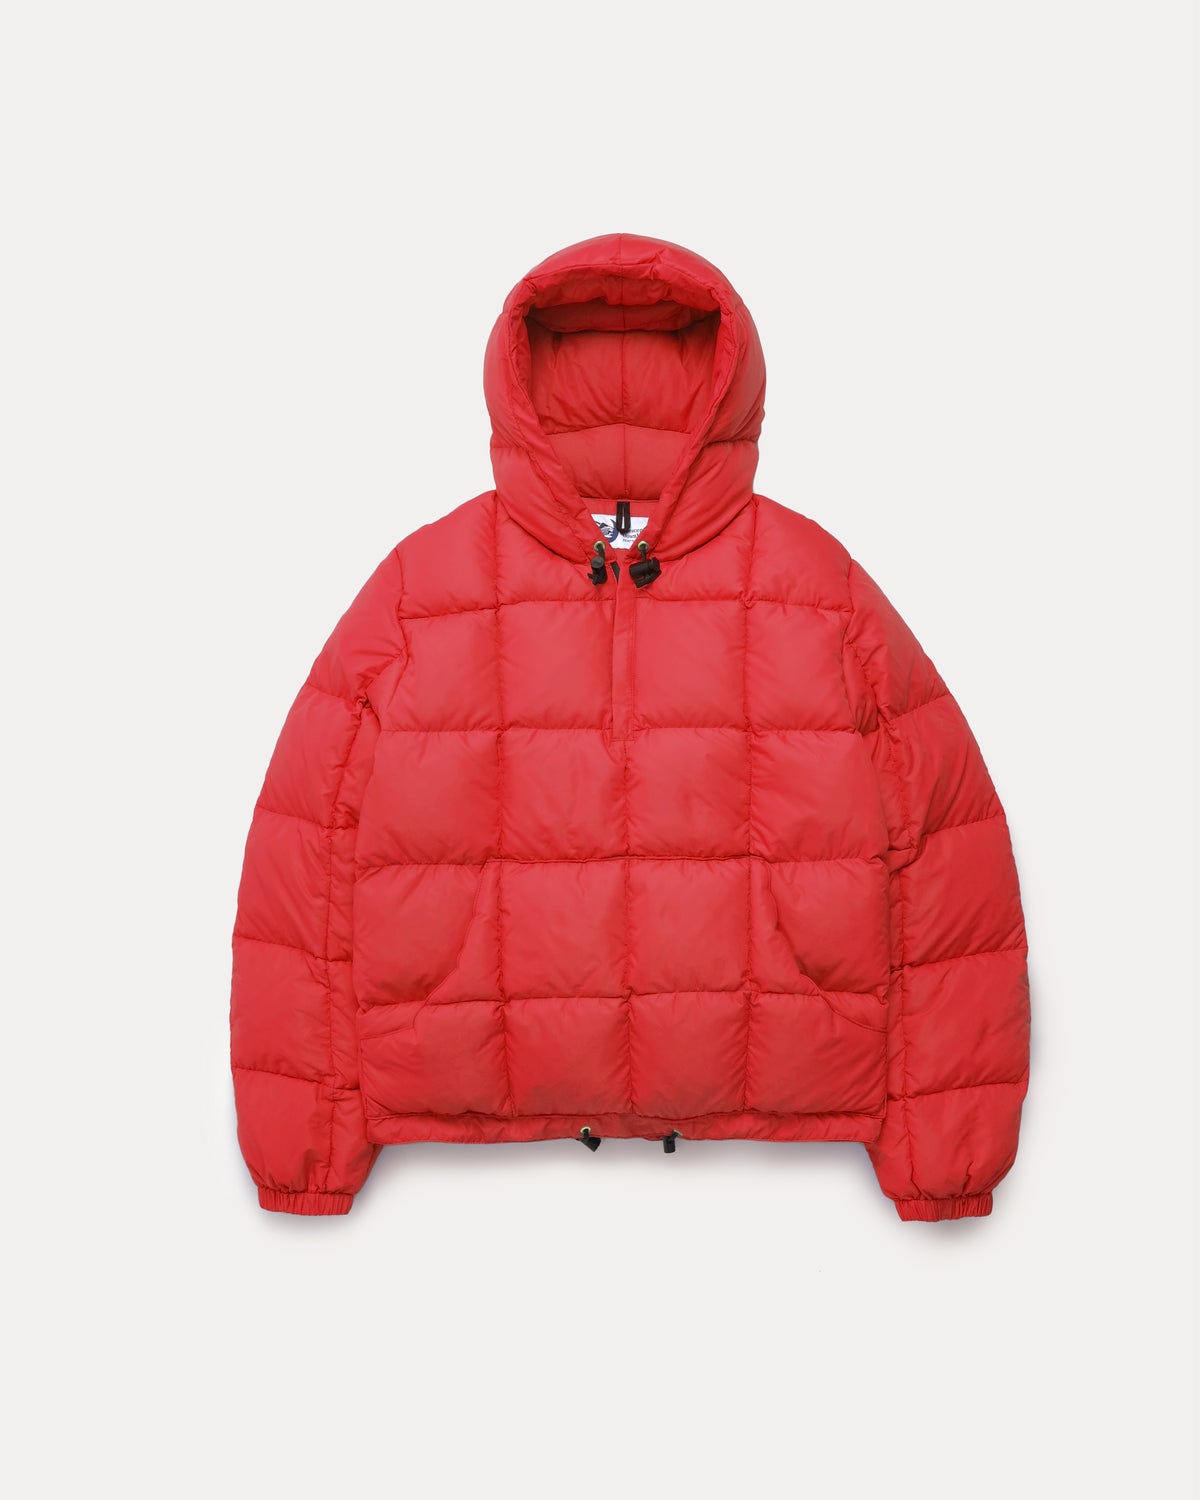 Hooded Pullover - Streakfree Nylon - Red